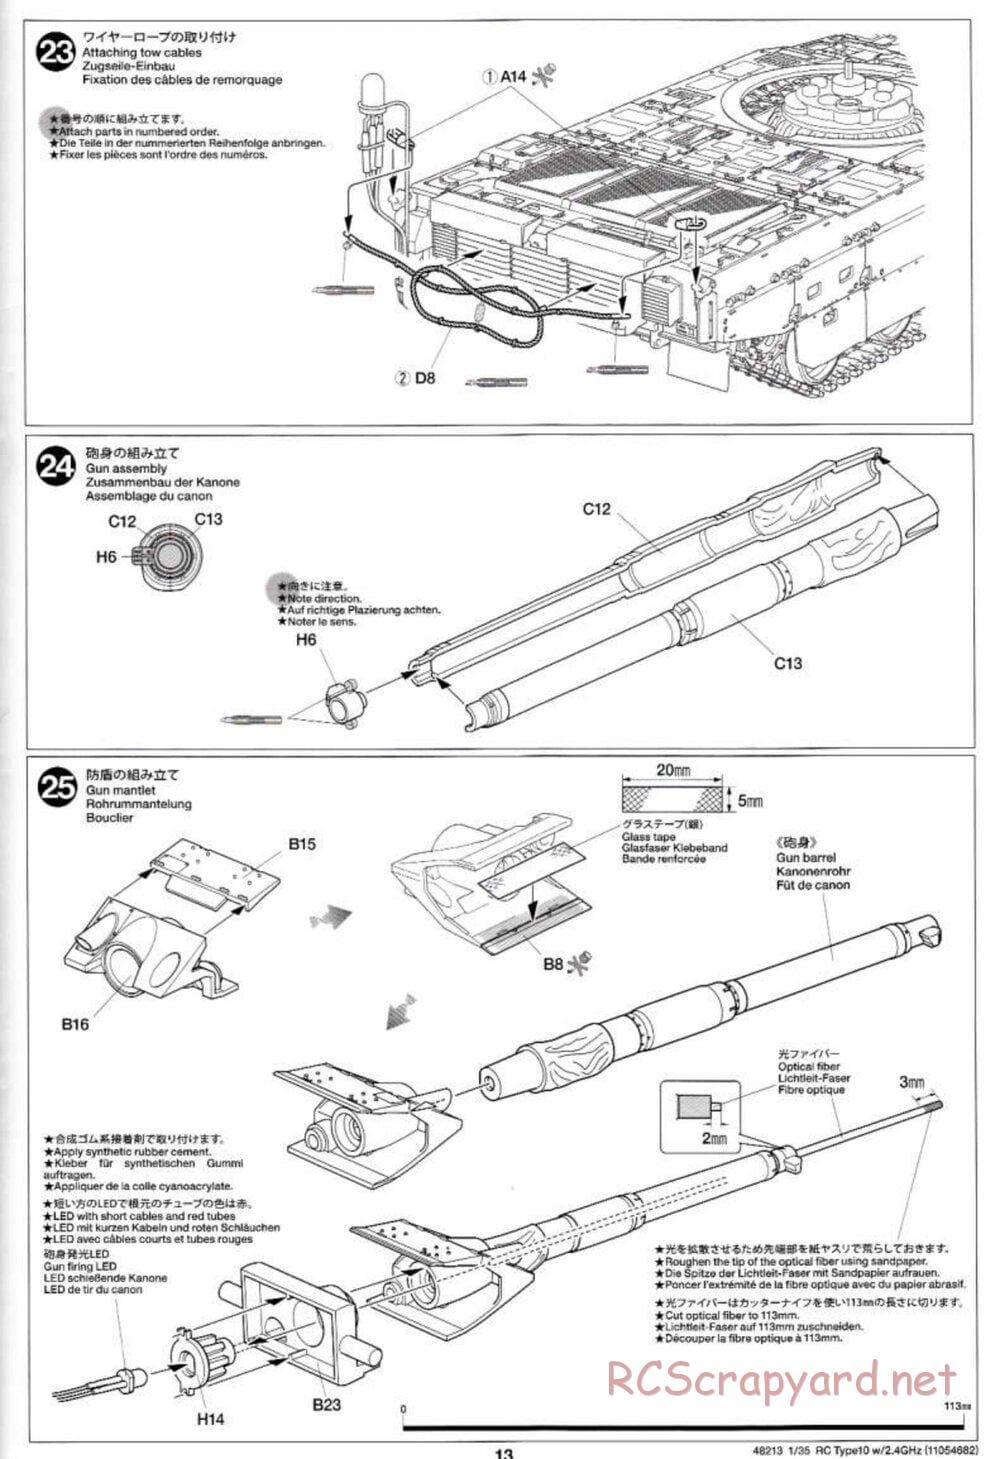 Tamiya - JGSDF Type 10 Tank - 1/35 Scale Chassis - Manual - Page 13